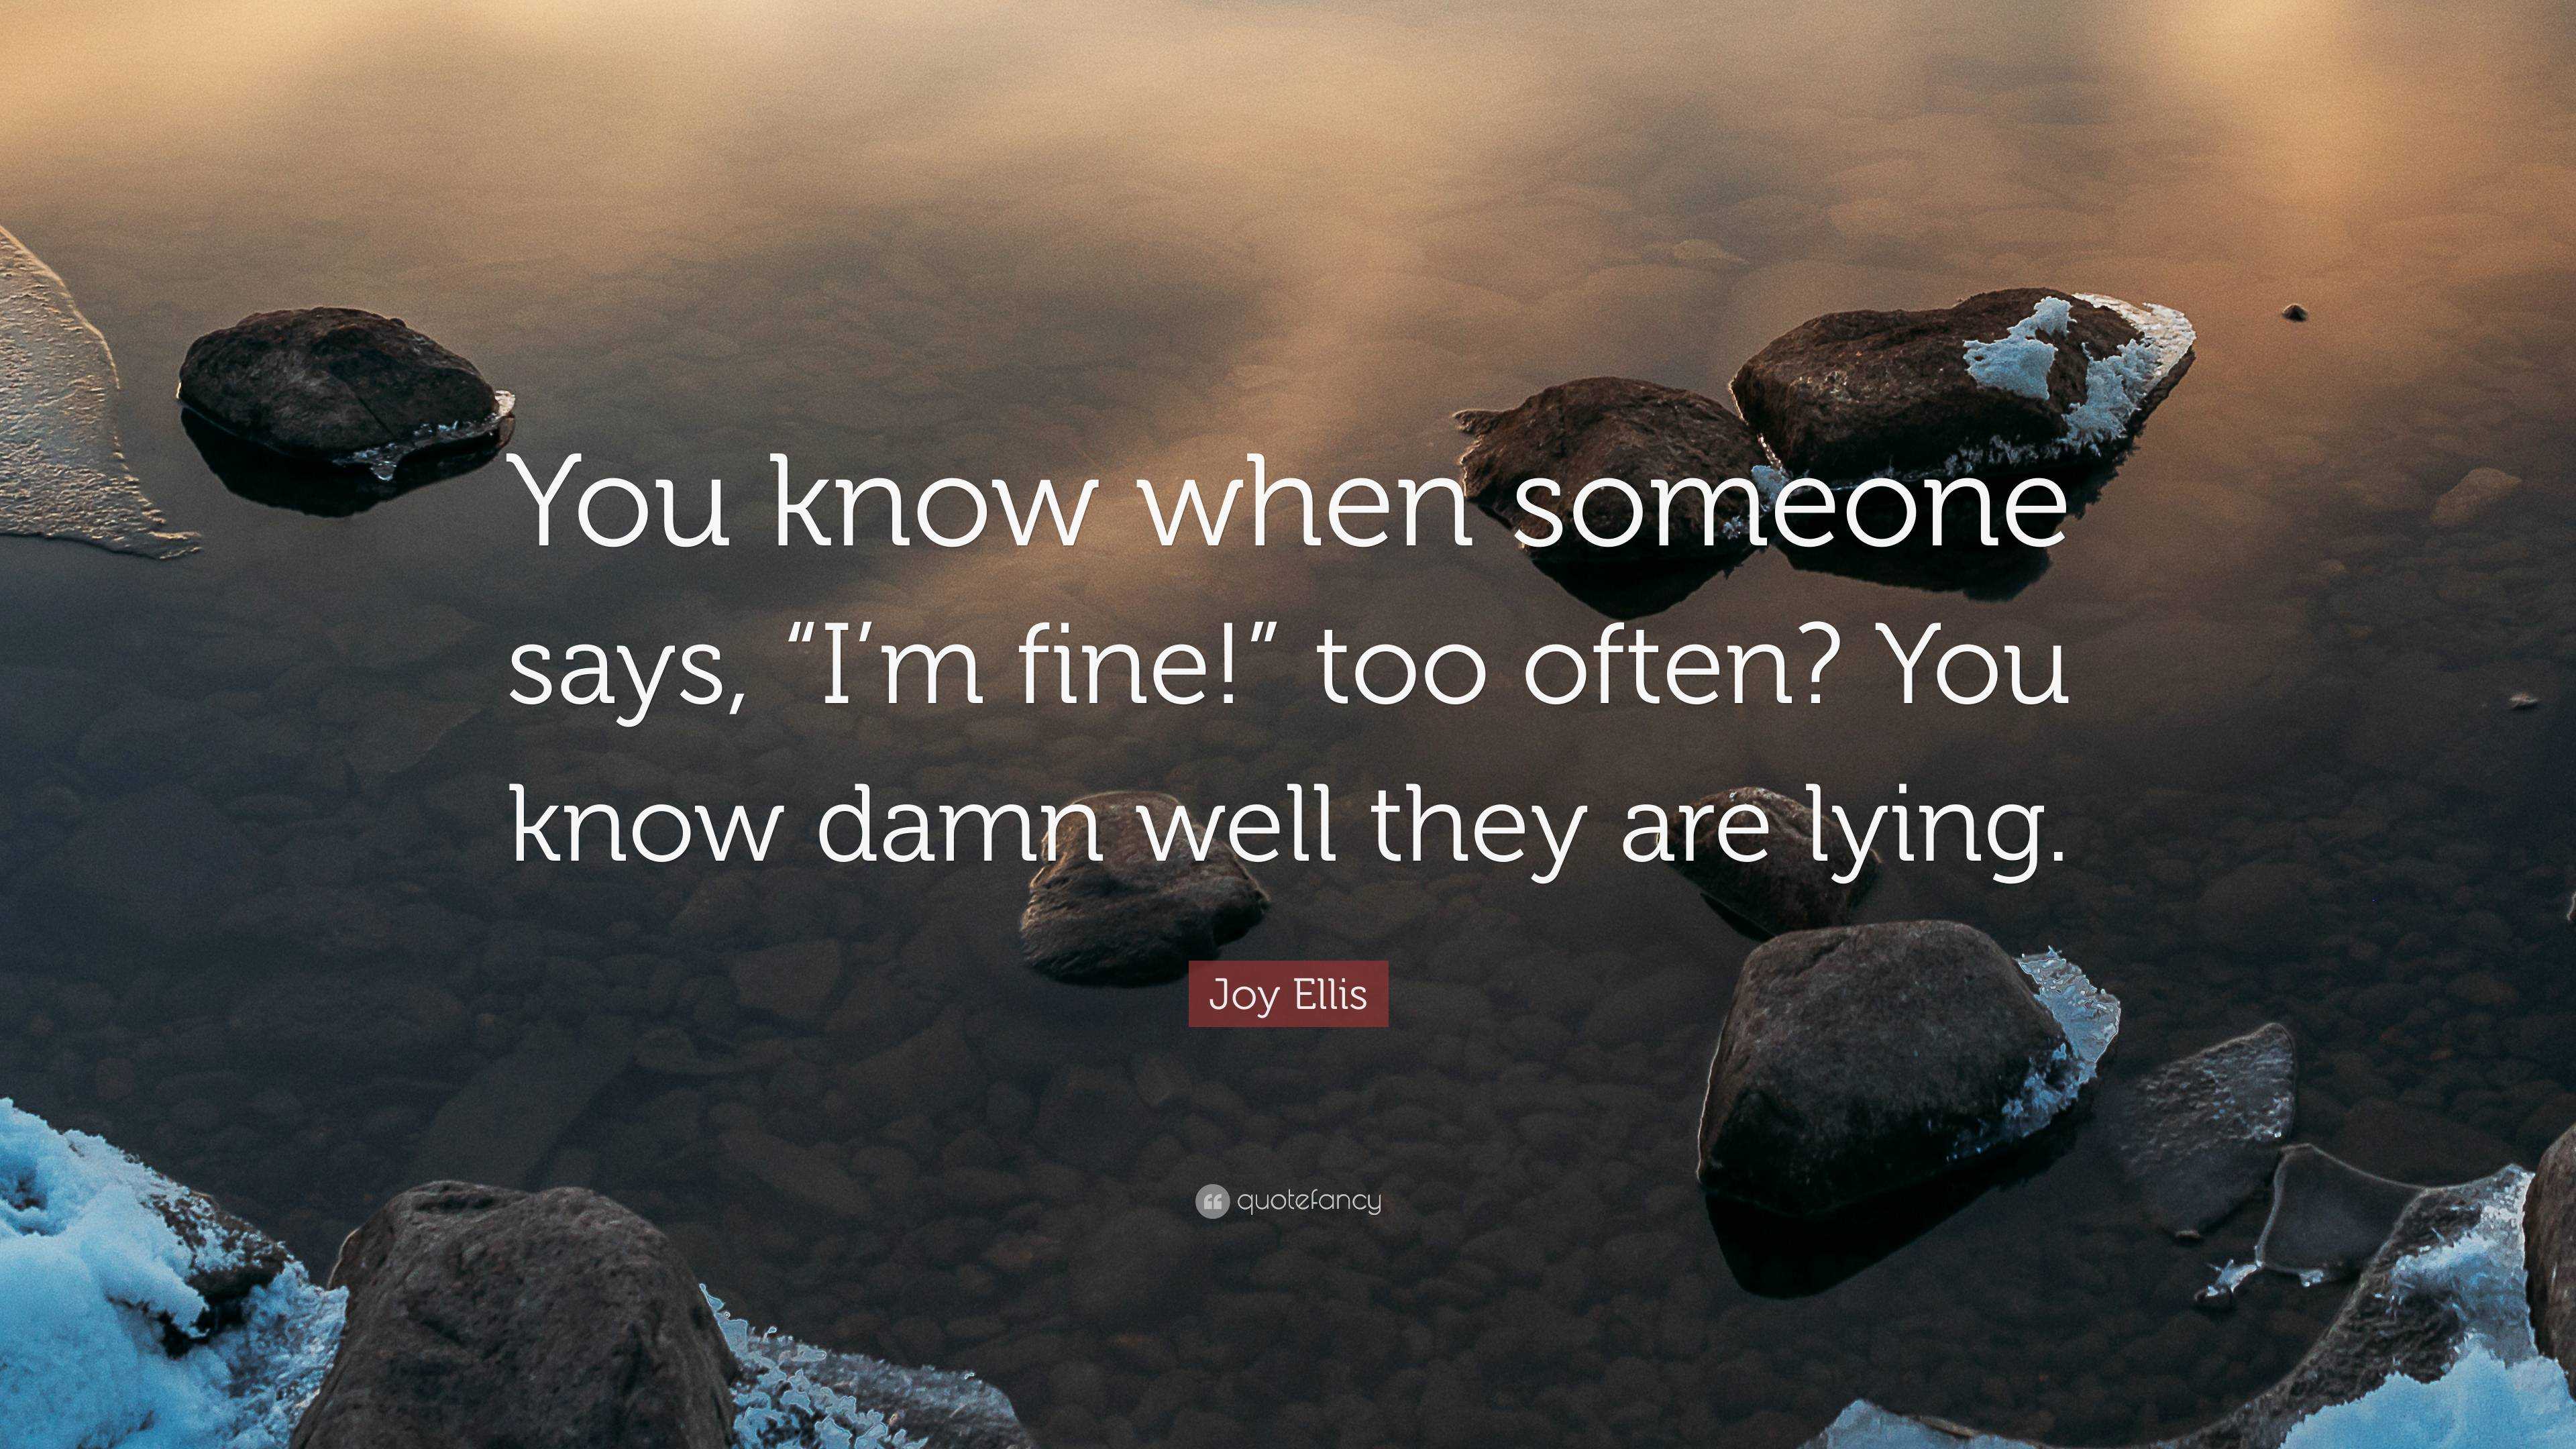 https://quotefancy.com/media/wallpaper/3840x2160/6737804-Joy-Ellis-Quote-You-know-when-someone-says-I-m-fine-too-often-You.jpg